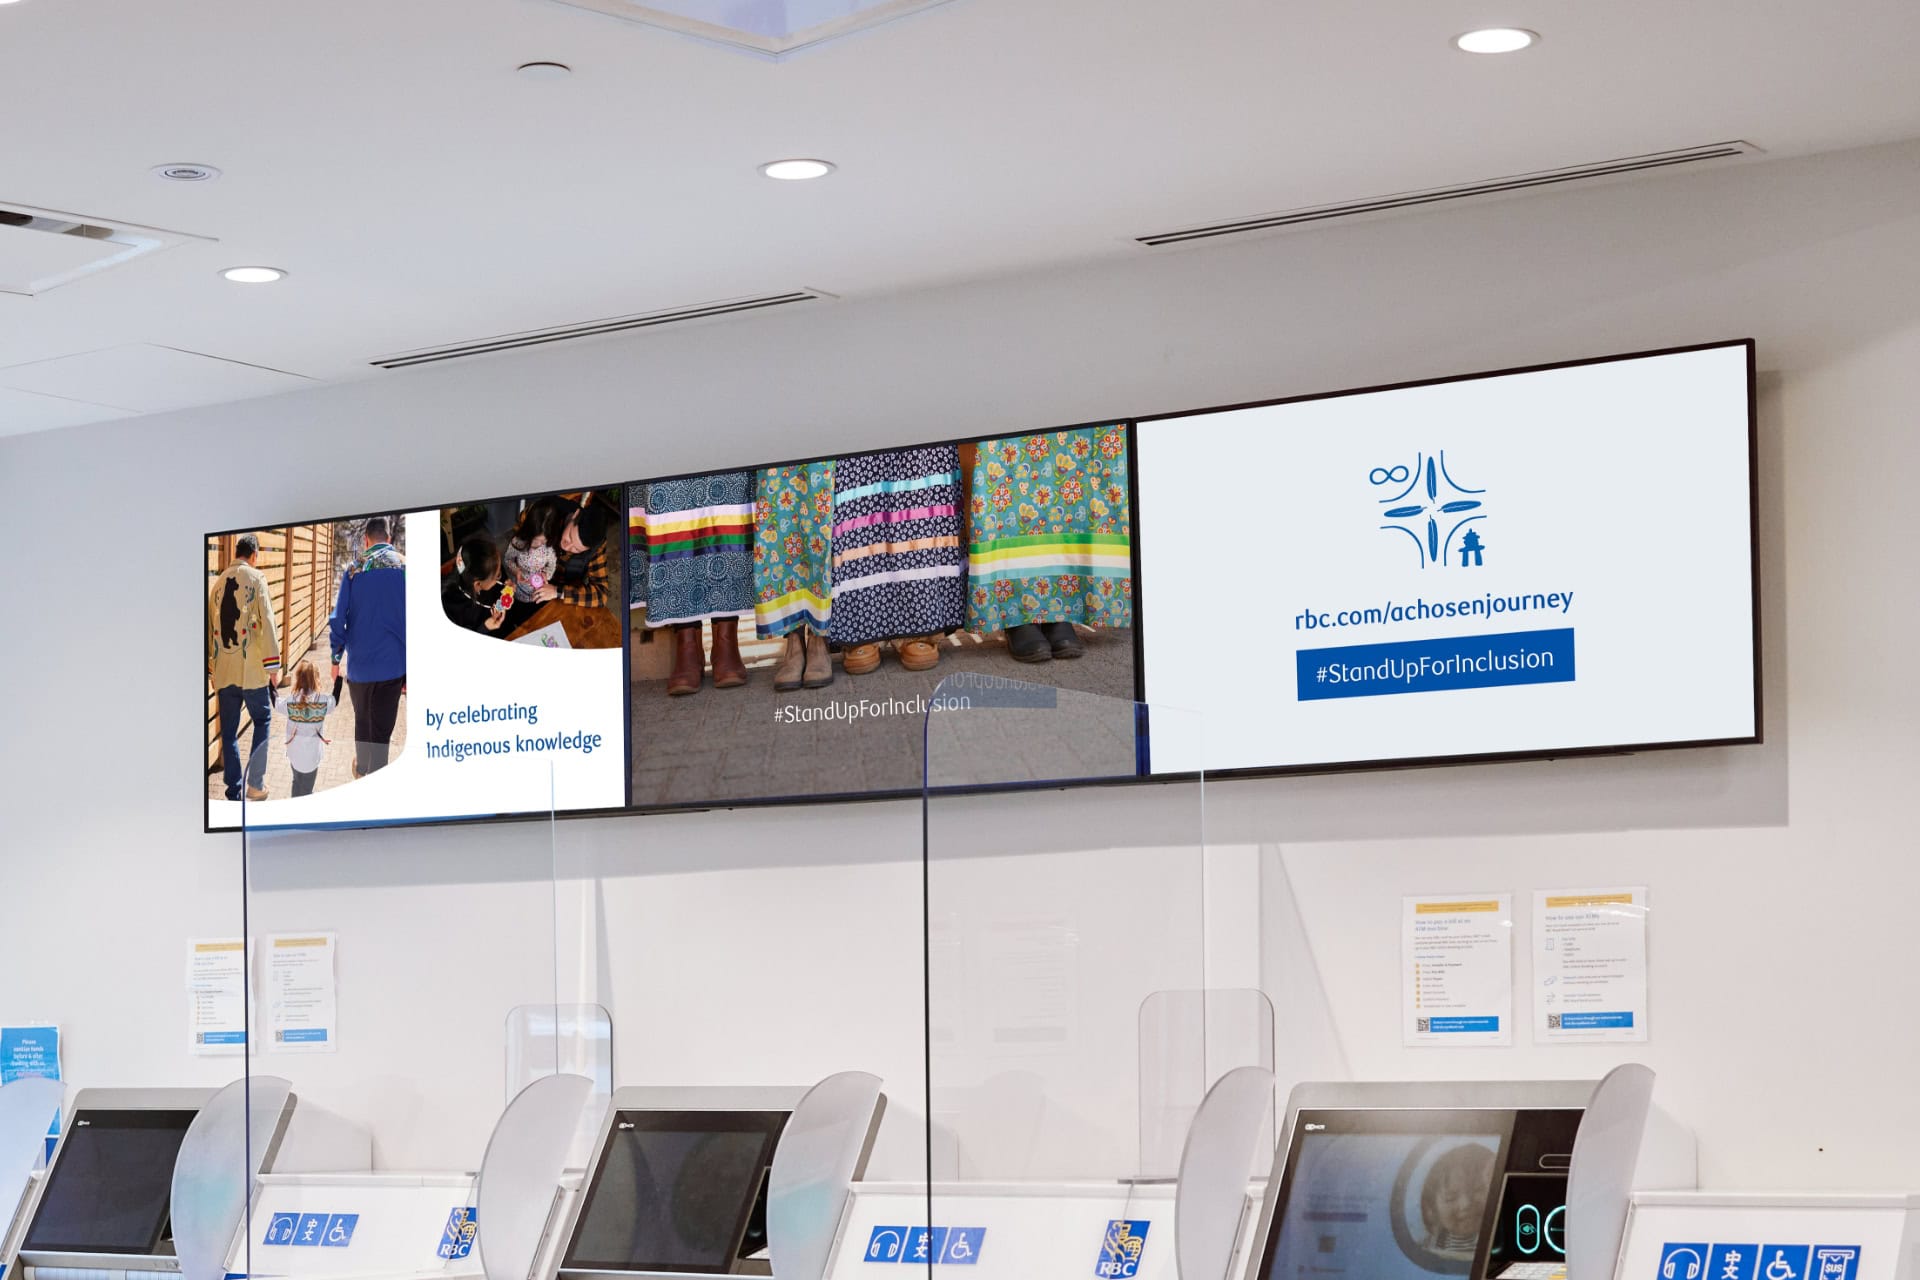 An interior view of an RBC branch. There are screens display A Chosen Journey messaging and imagery above teller machines.